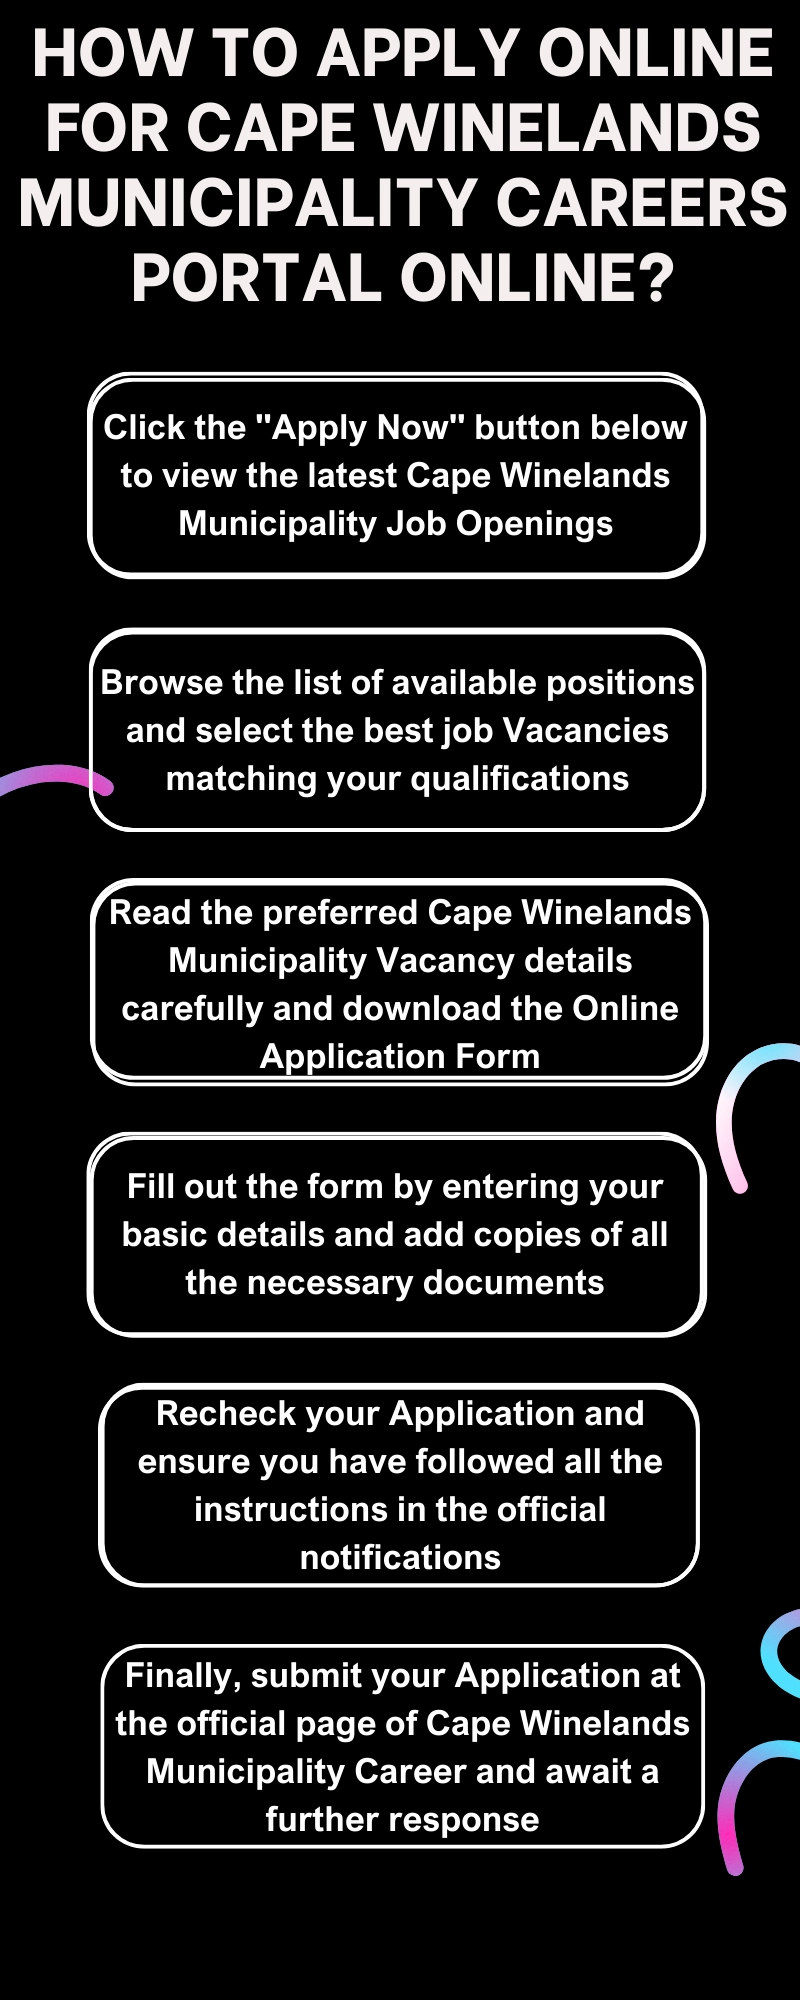 How to Apply online for Cape Winelands Municipality Careers Portal Online?